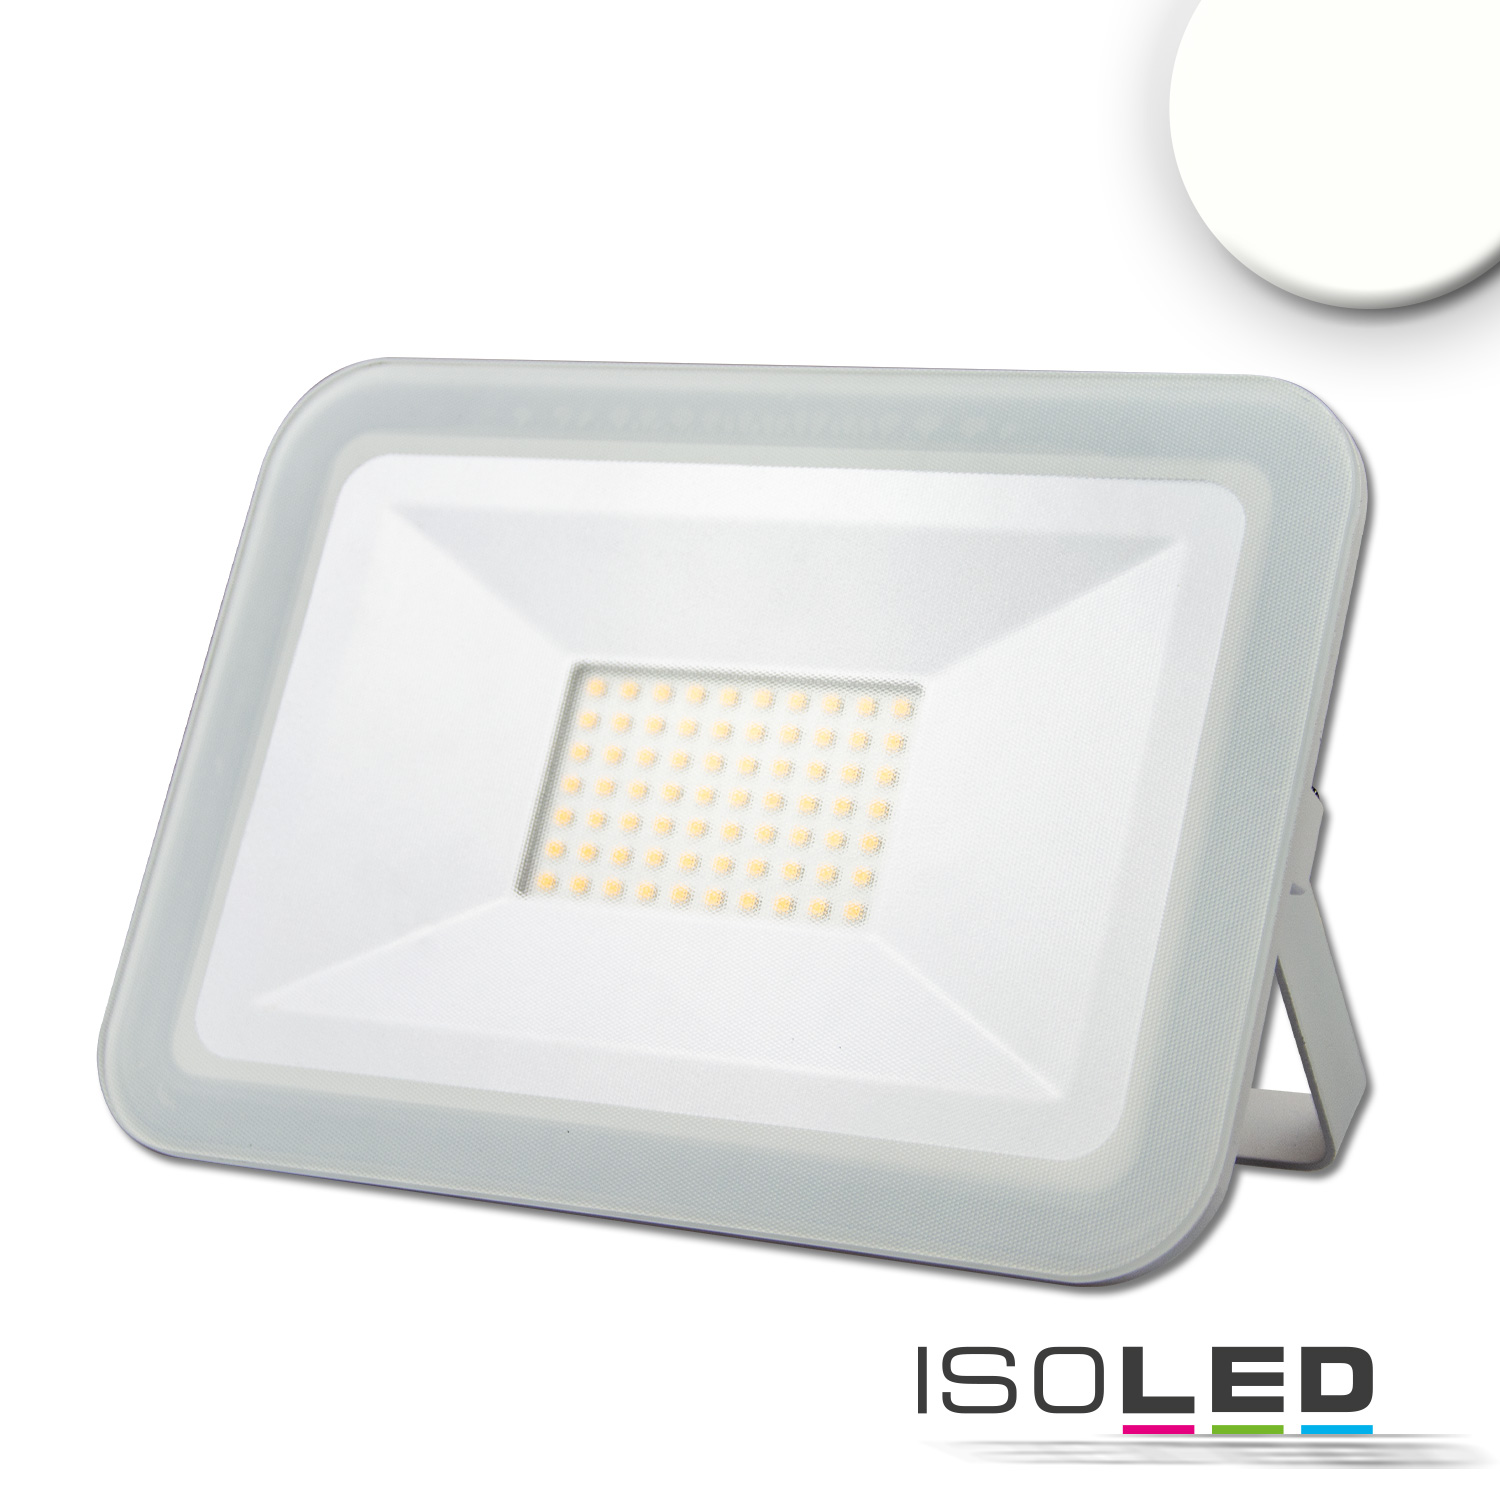 ISOLED 115111 LED Fluter Pad 50W, weiss, 4000K 100cm Kabel